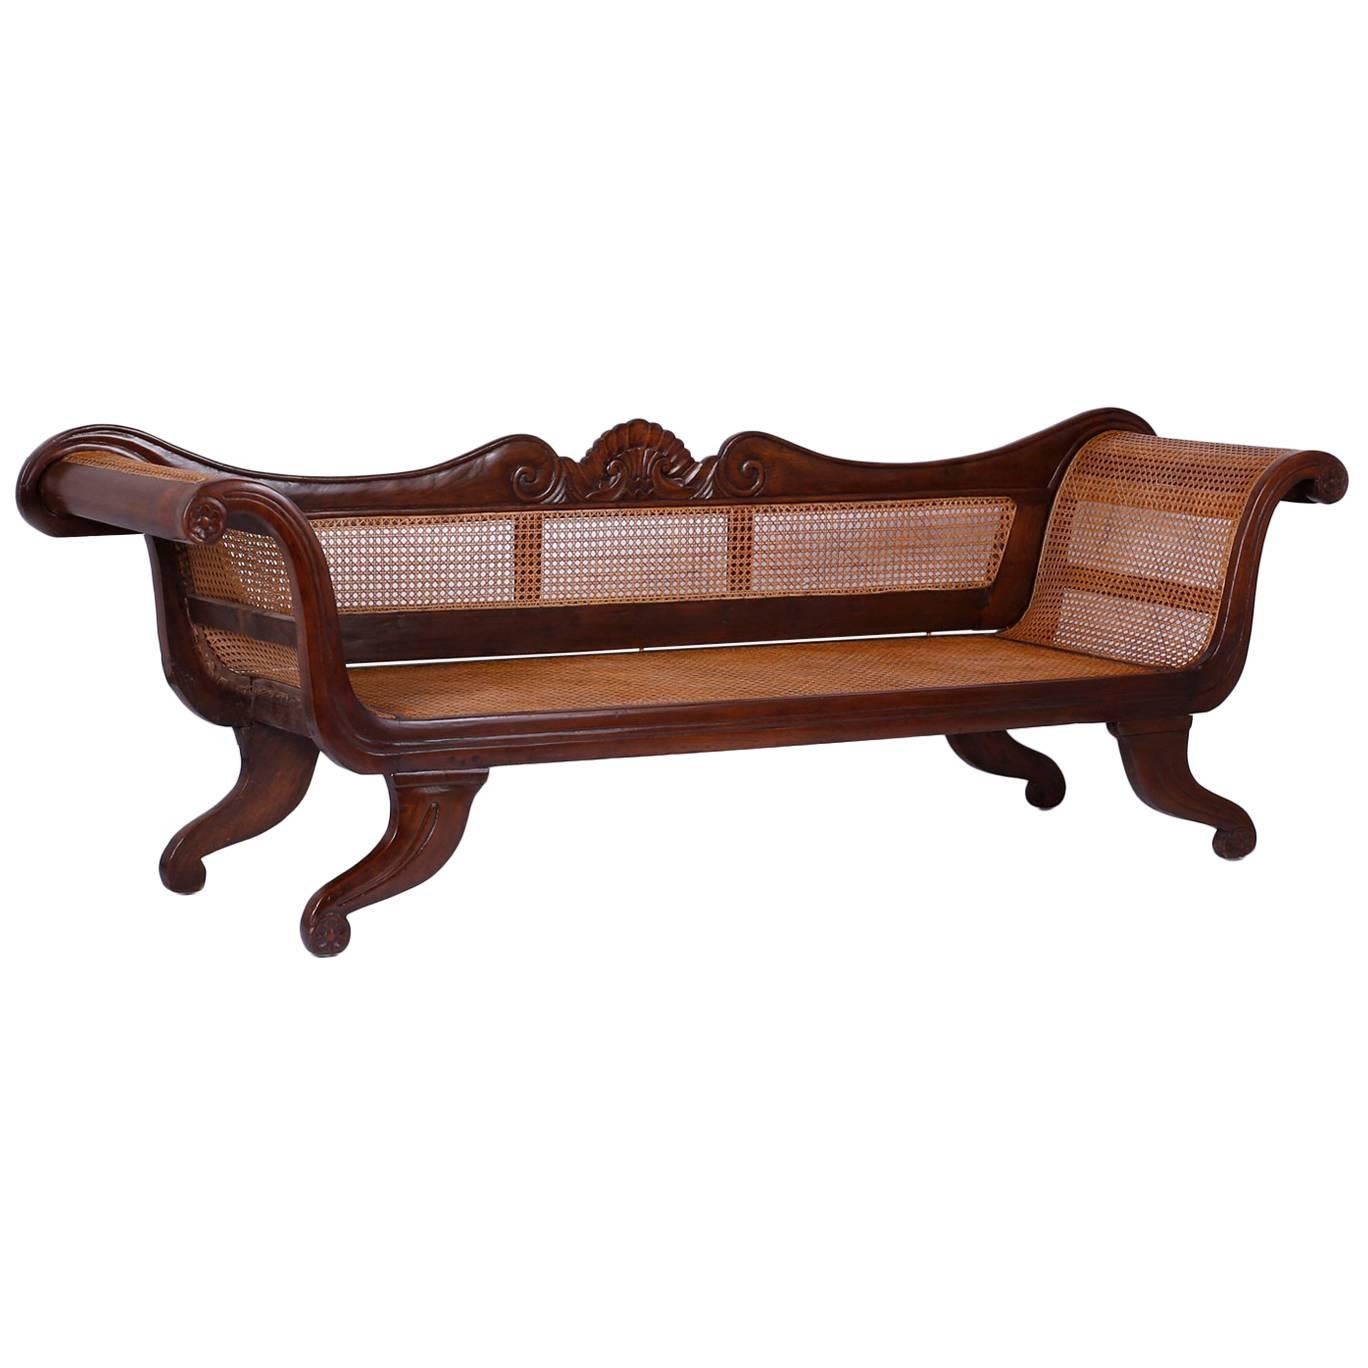 Antique British Colonial West Indies Settee